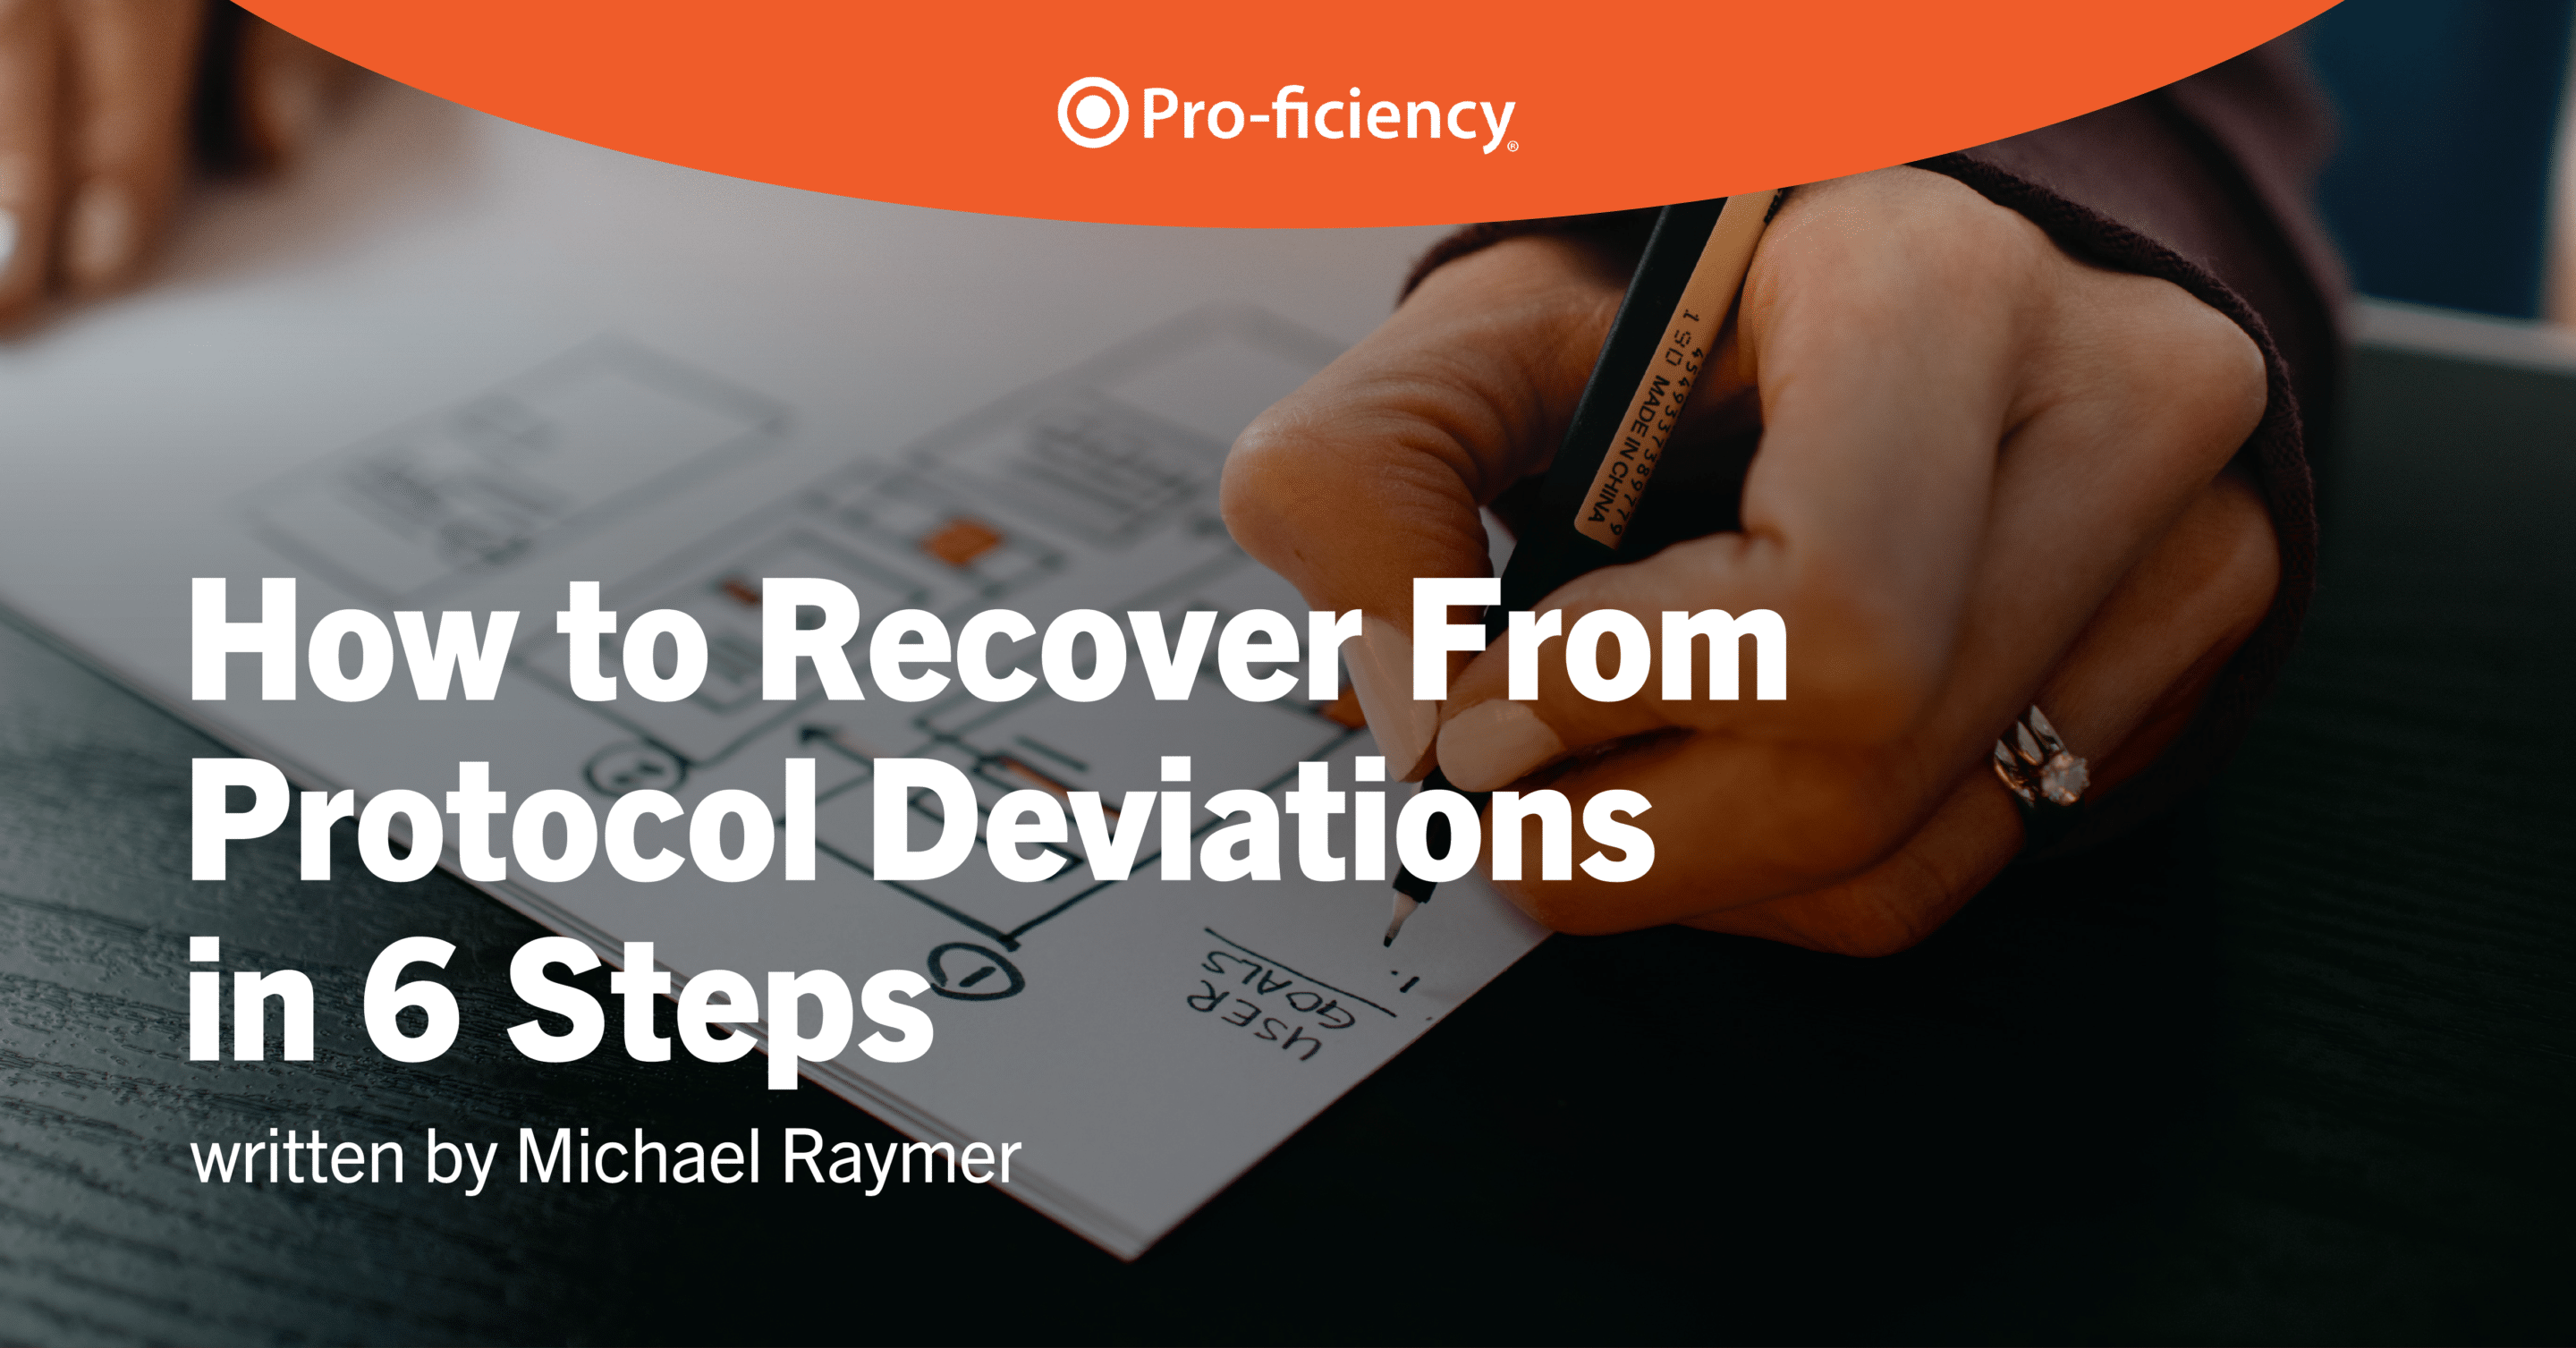 How to Recover From Protocol Deviations in 6 Steps